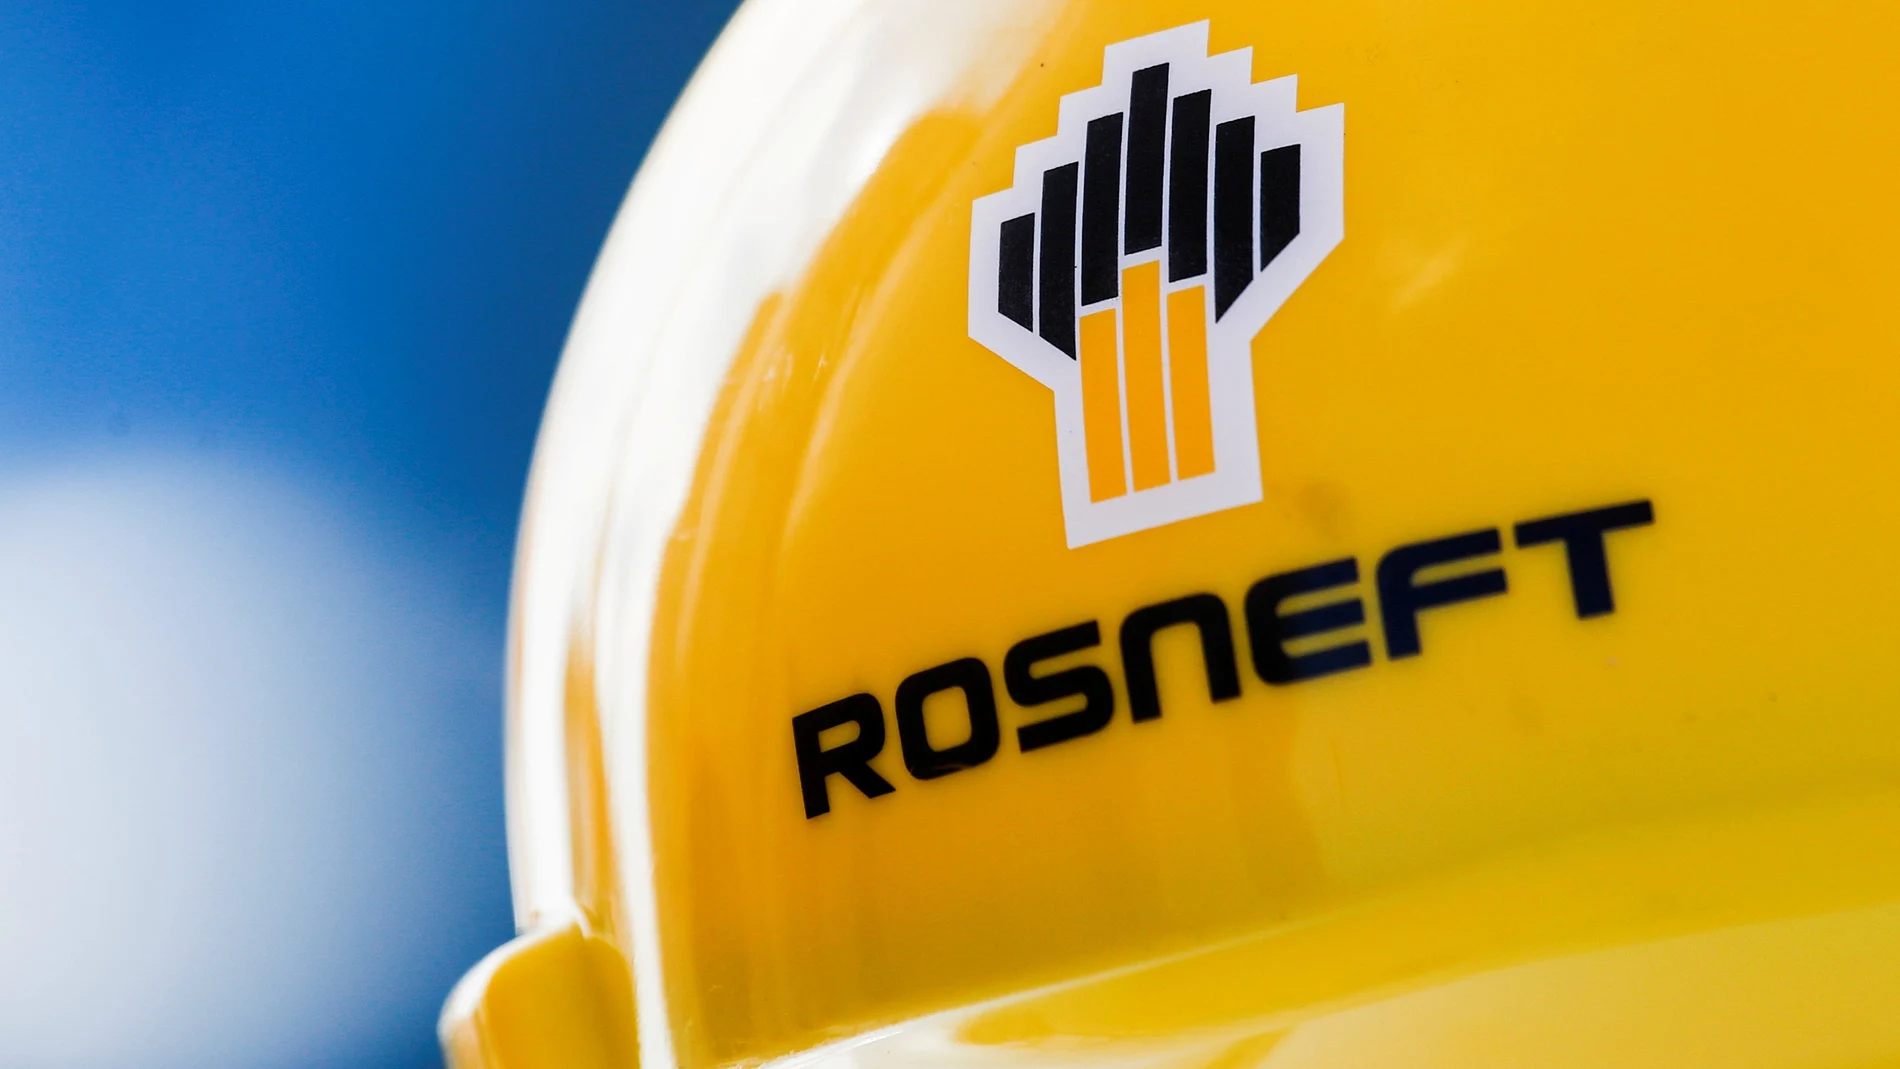 FILE PHOTO: Rosneft logo is pictured on a safety helmet in Vung Tau